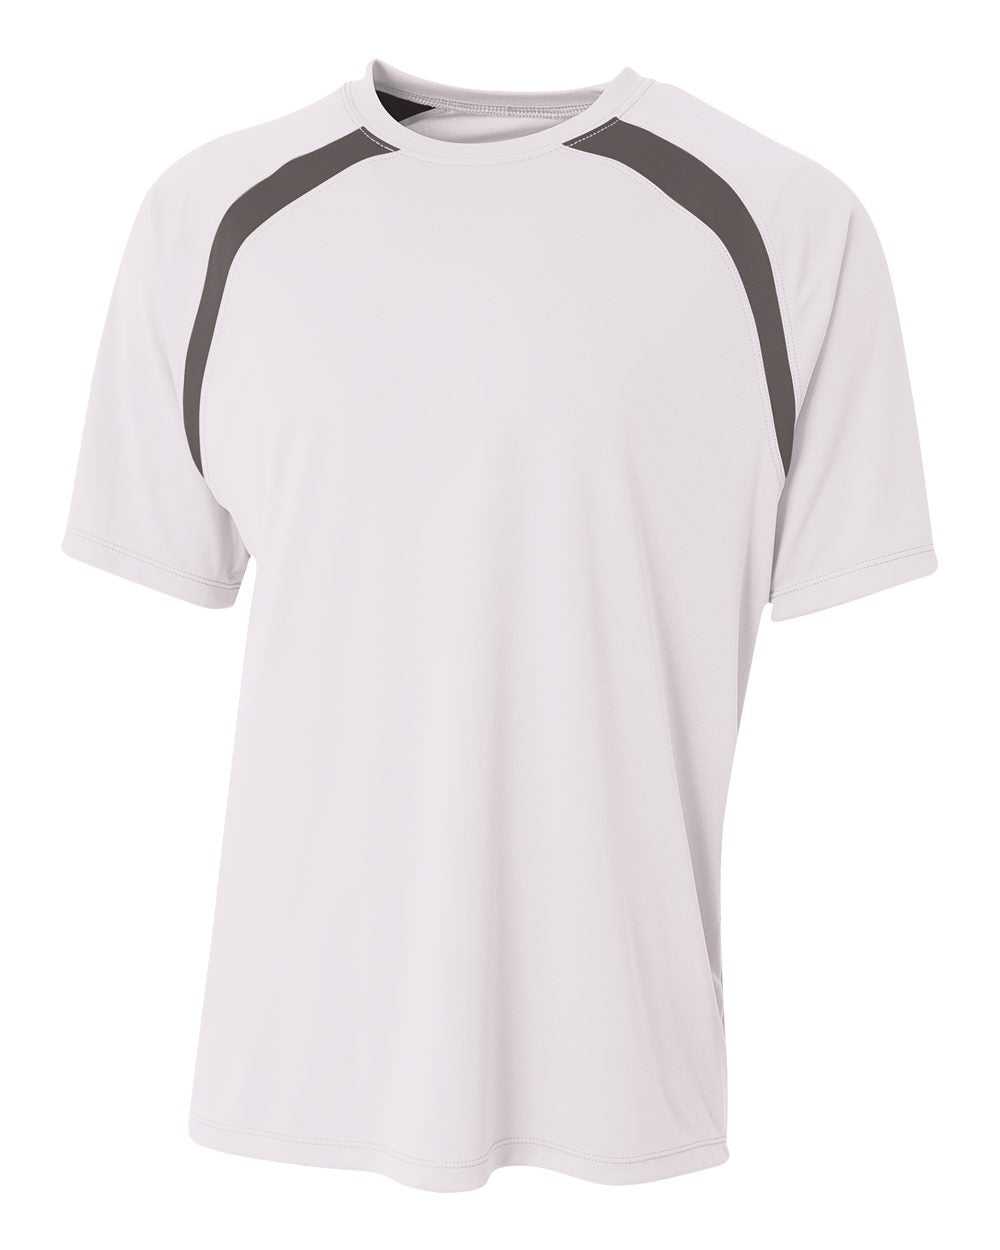 A4 NB3001 Youth Spartan Short Sleeve Color Block Crew - White Graphite - HIT a Double